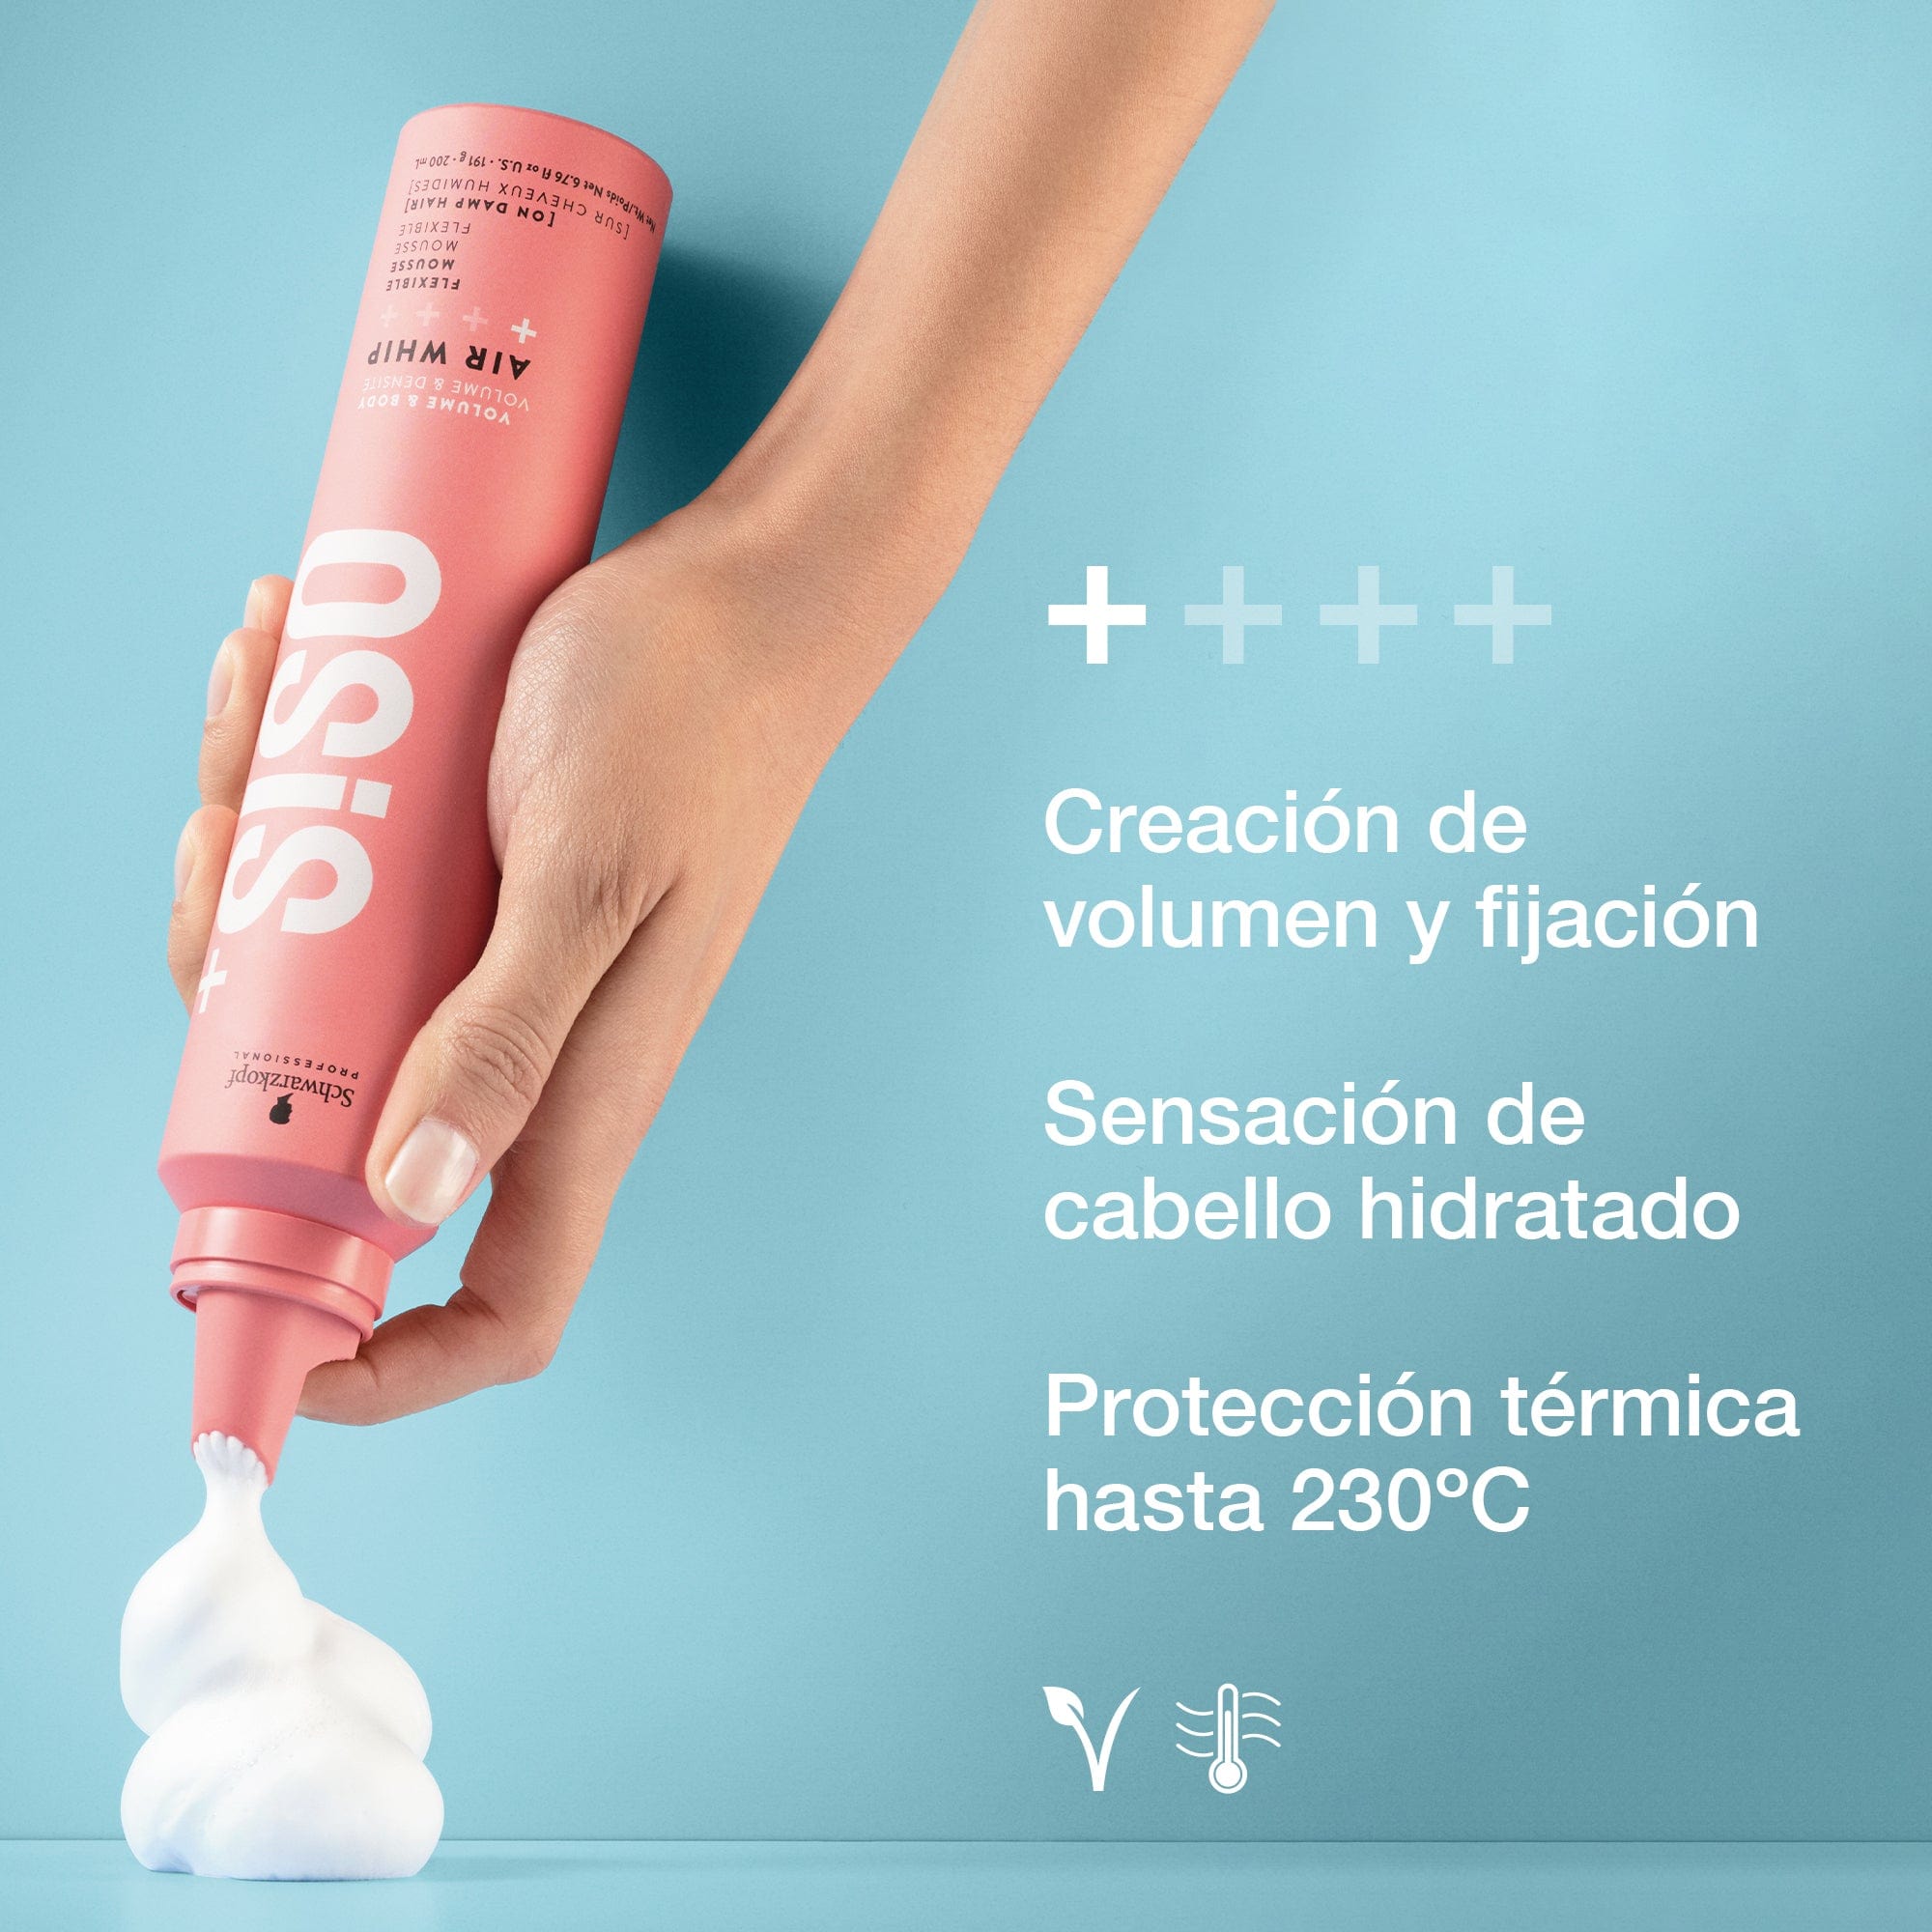 Osis Nuevo Hair Styling Products OSiS Air Whip 200ml Roberta Beauty Club Tienda Online Productos de Peluqueria